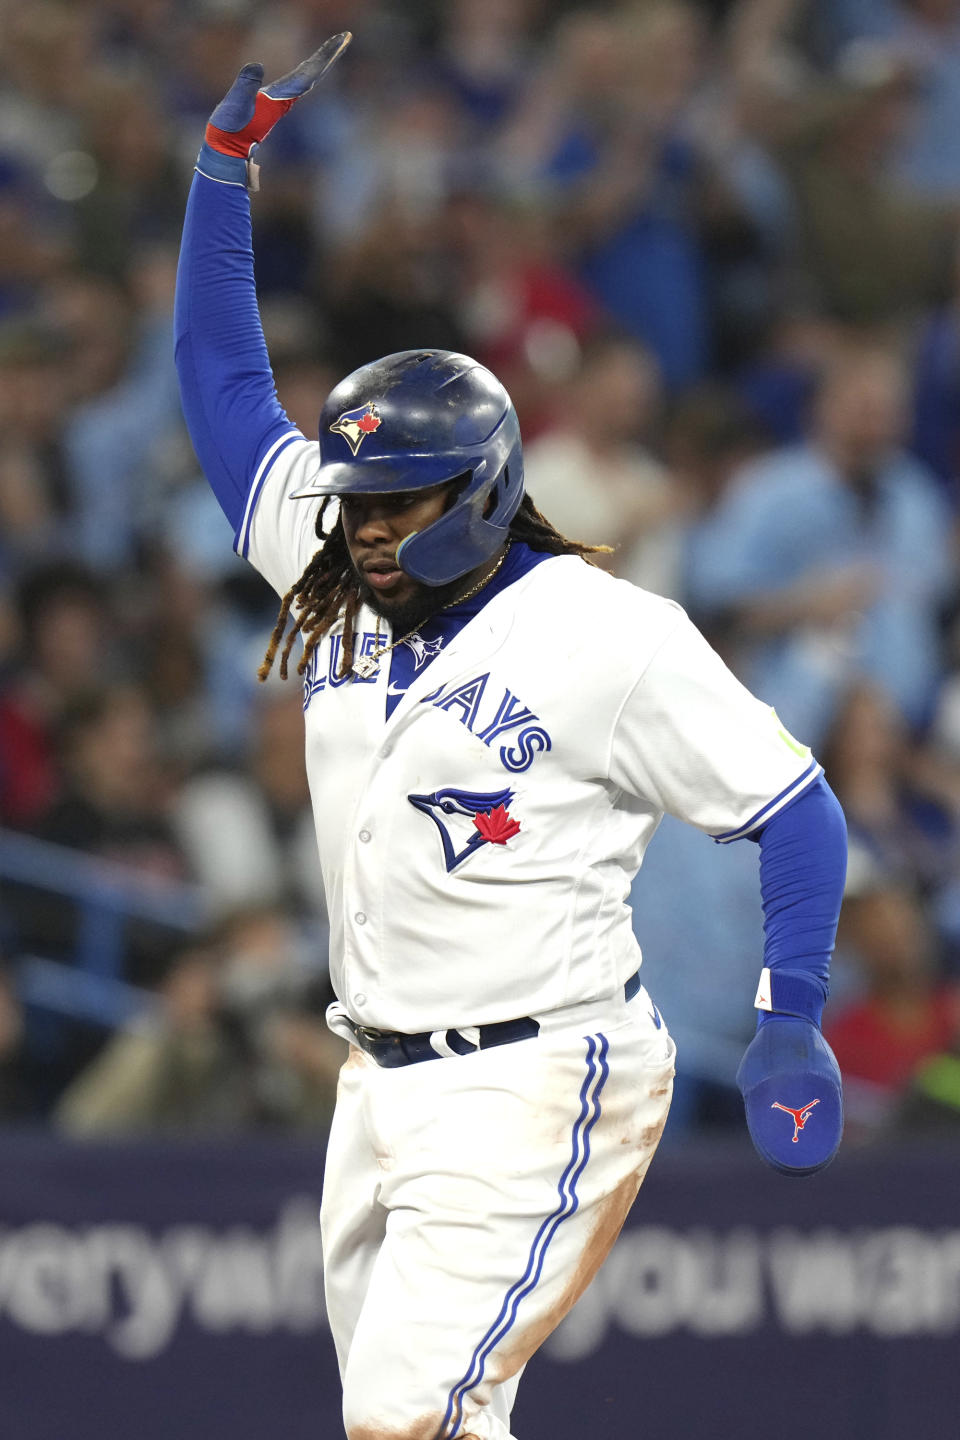 Toronto Blue Jays' Vladimir Guerrero Jr. celebrates as he crosses home plate to score against the Tampa Bay Rays during the sixth inning of a baseball game Friday, Sept. 29, 2023, in Toronto. (Chris Young/The Canadian Press via AP)